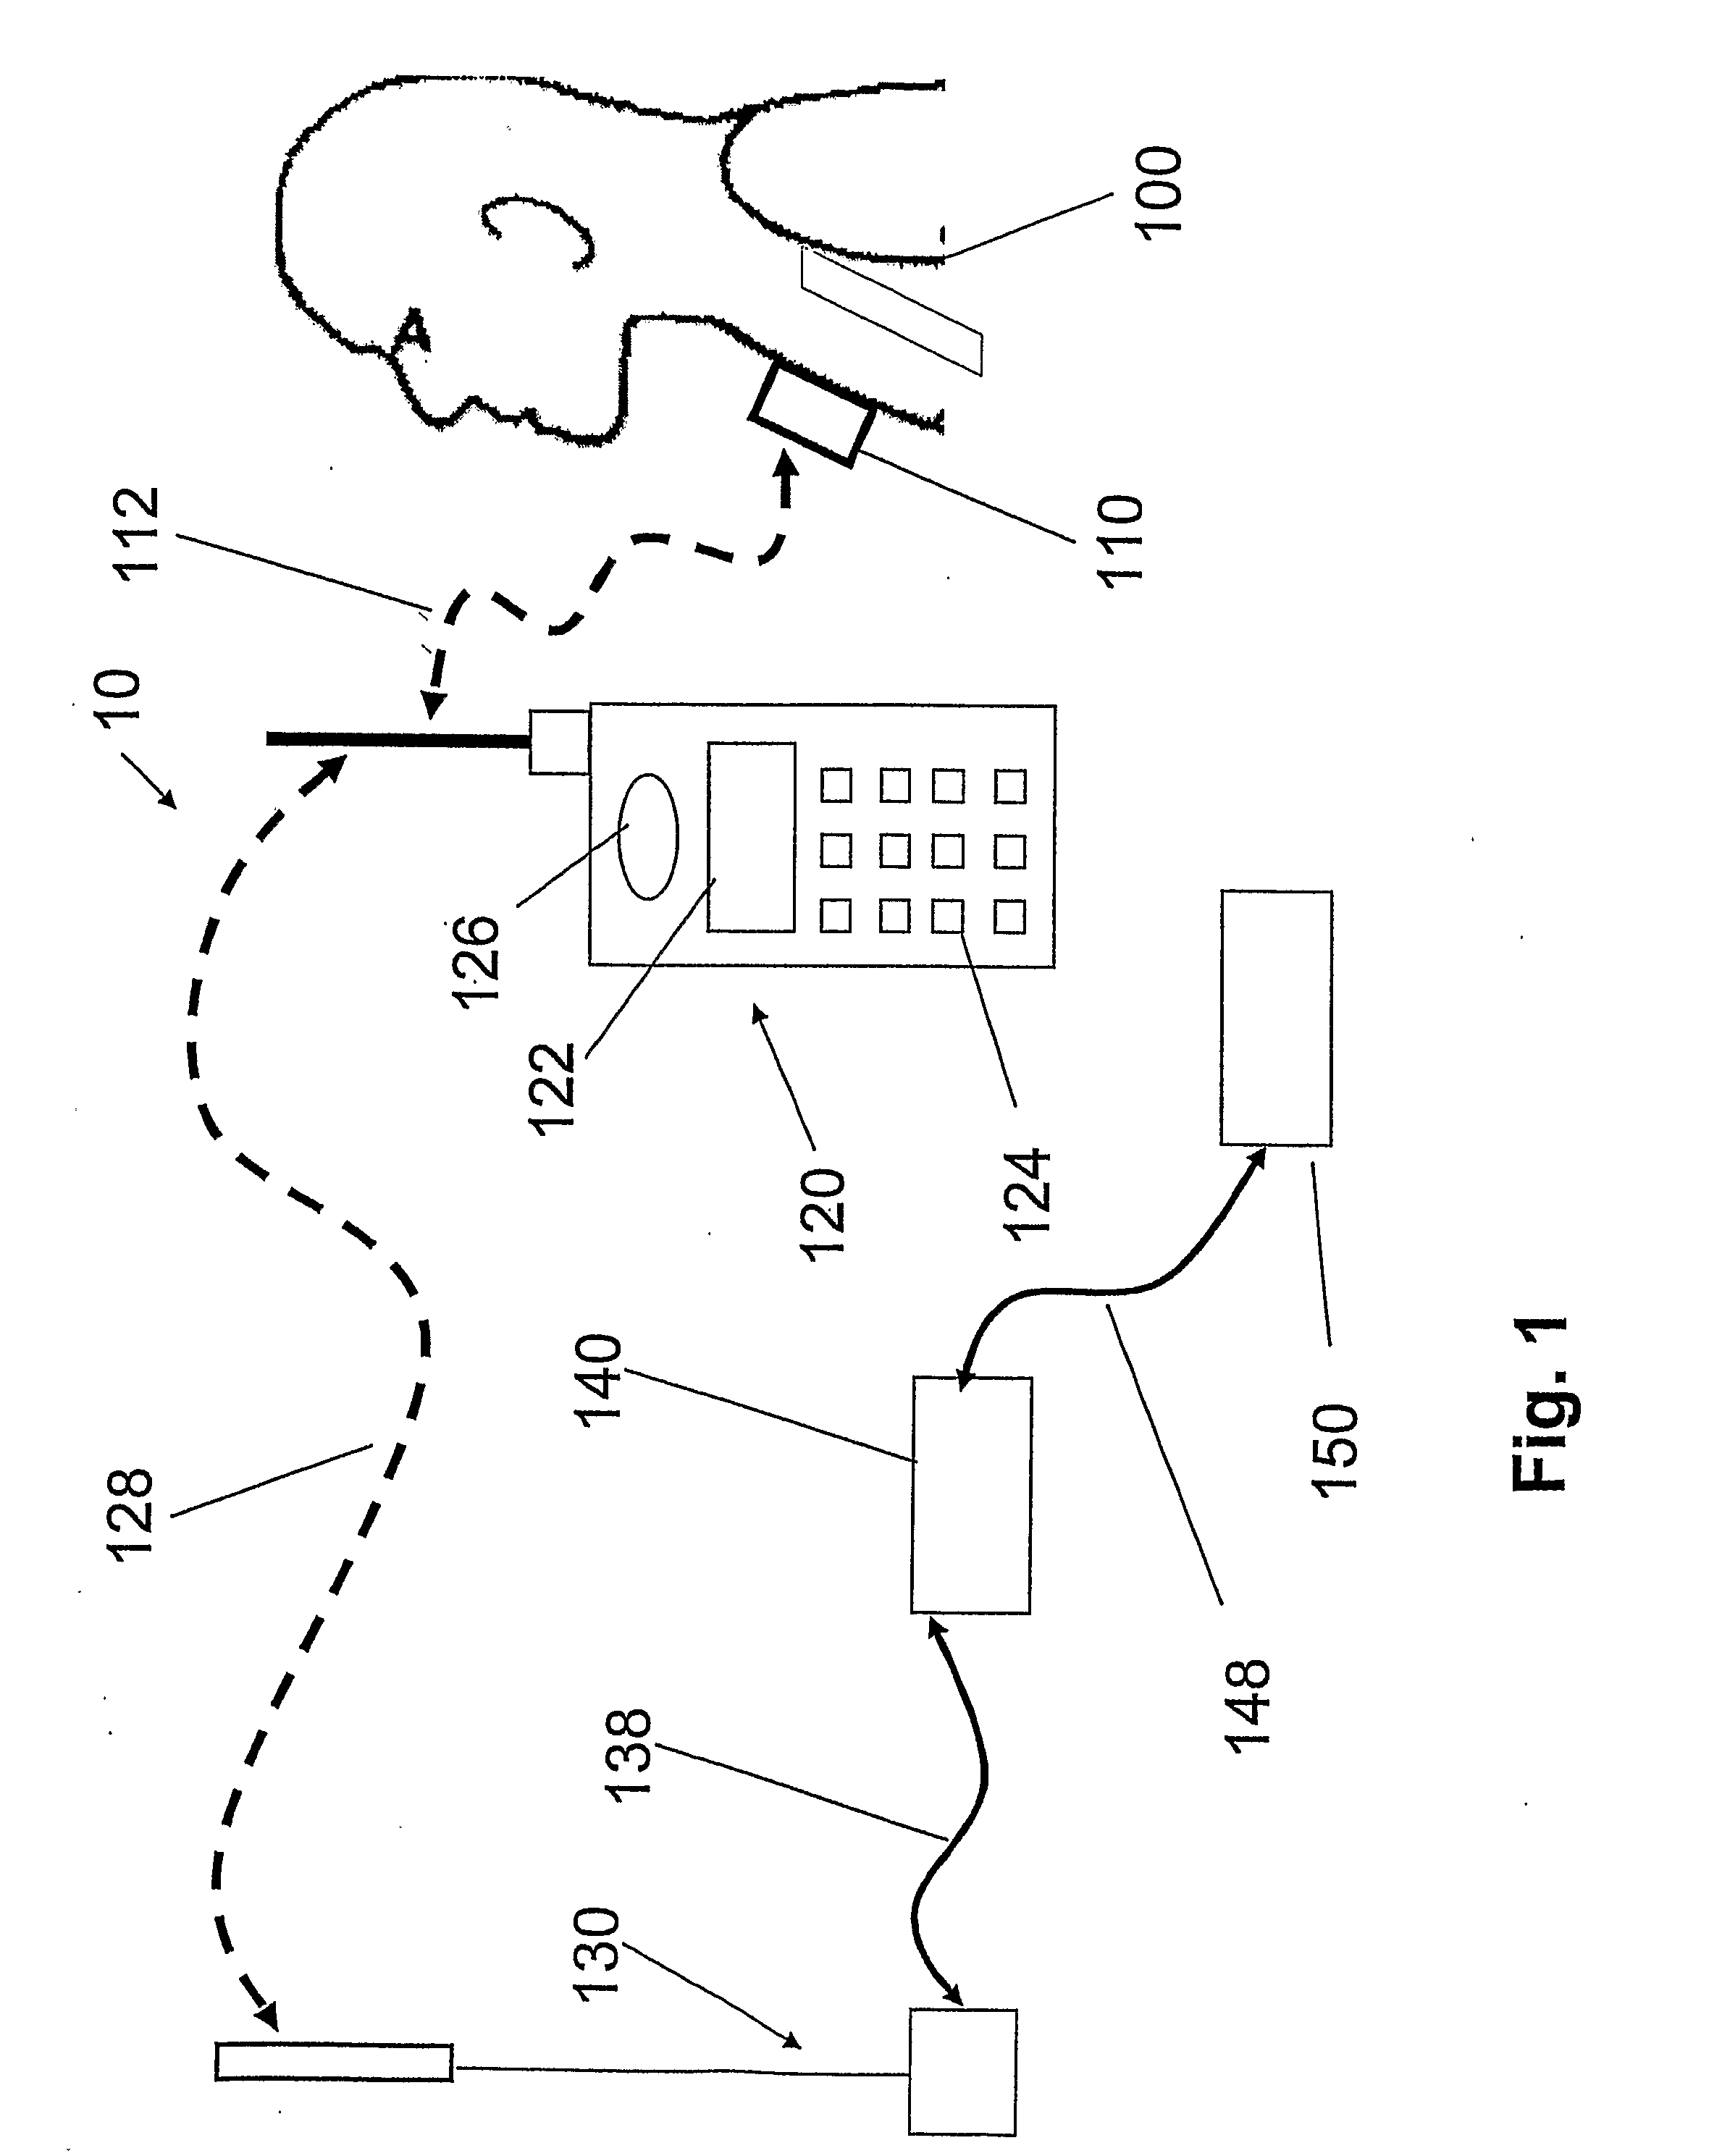 Methods and Systems for Physiological and Psycho-Physiological Monitoring and Uses Thereof